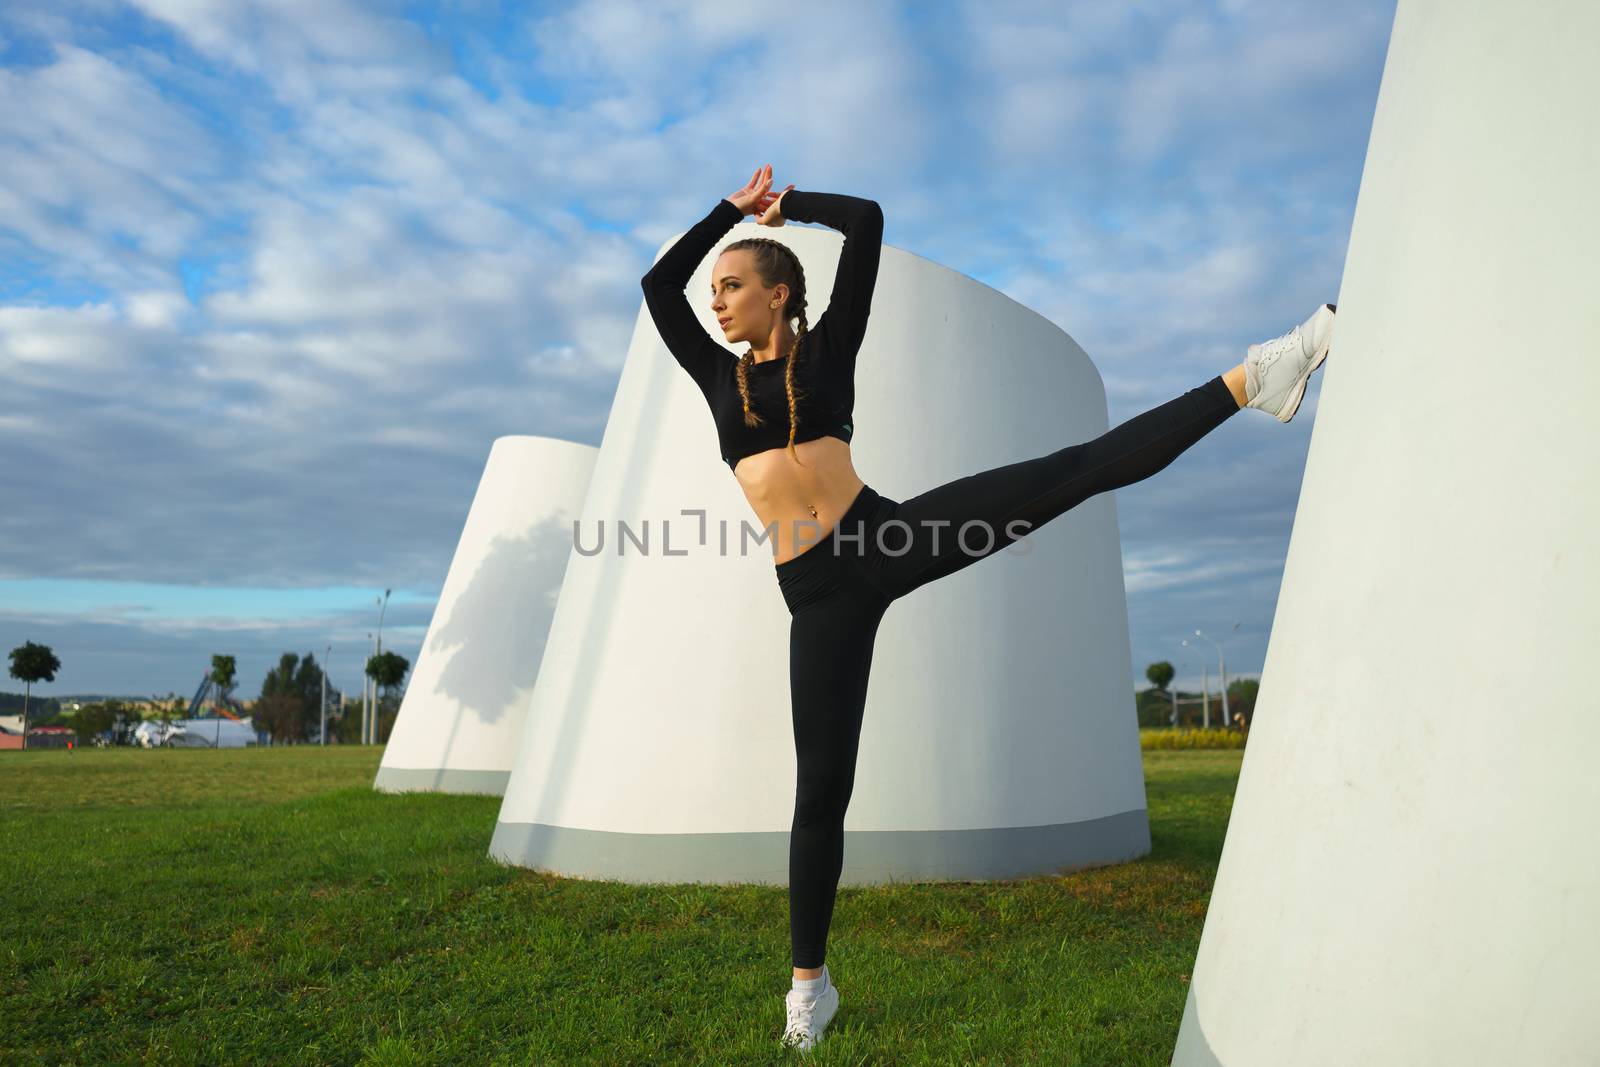 Happy girl stretch outdoor at modern urban area during sunset by mrakor